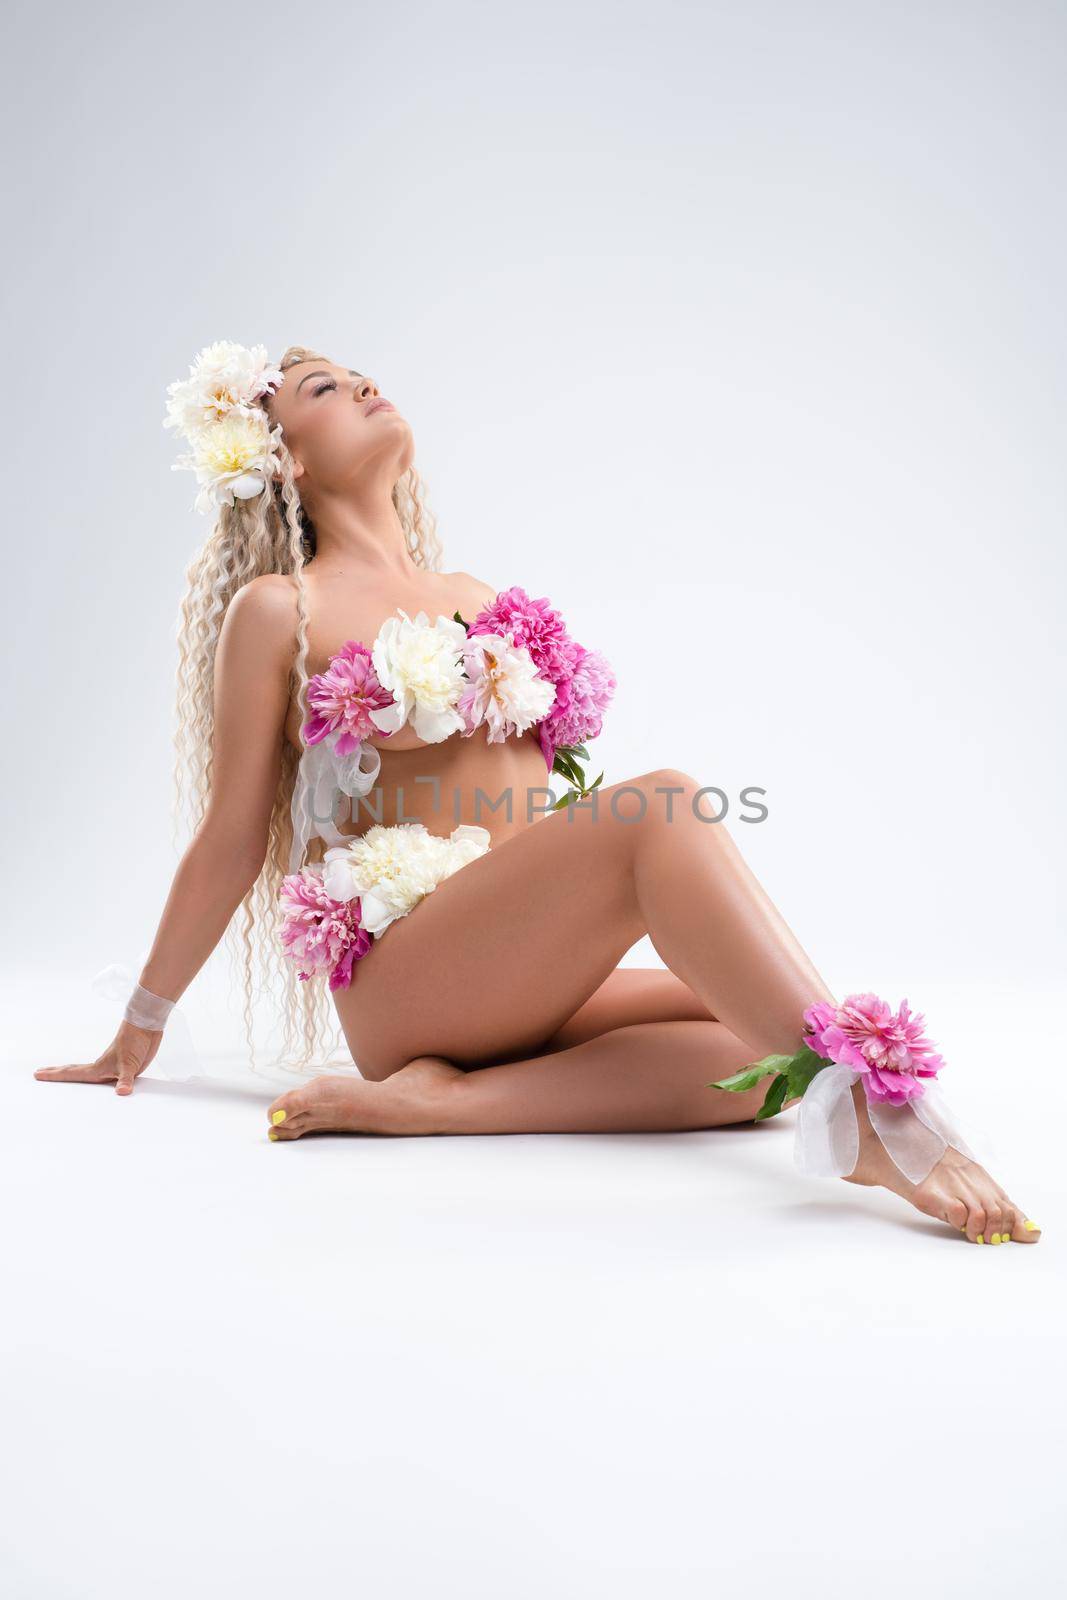 Full body of sensual female model with long blond curly hair and bunch of fresh flowers on naked body sitting on floor against white background in studio